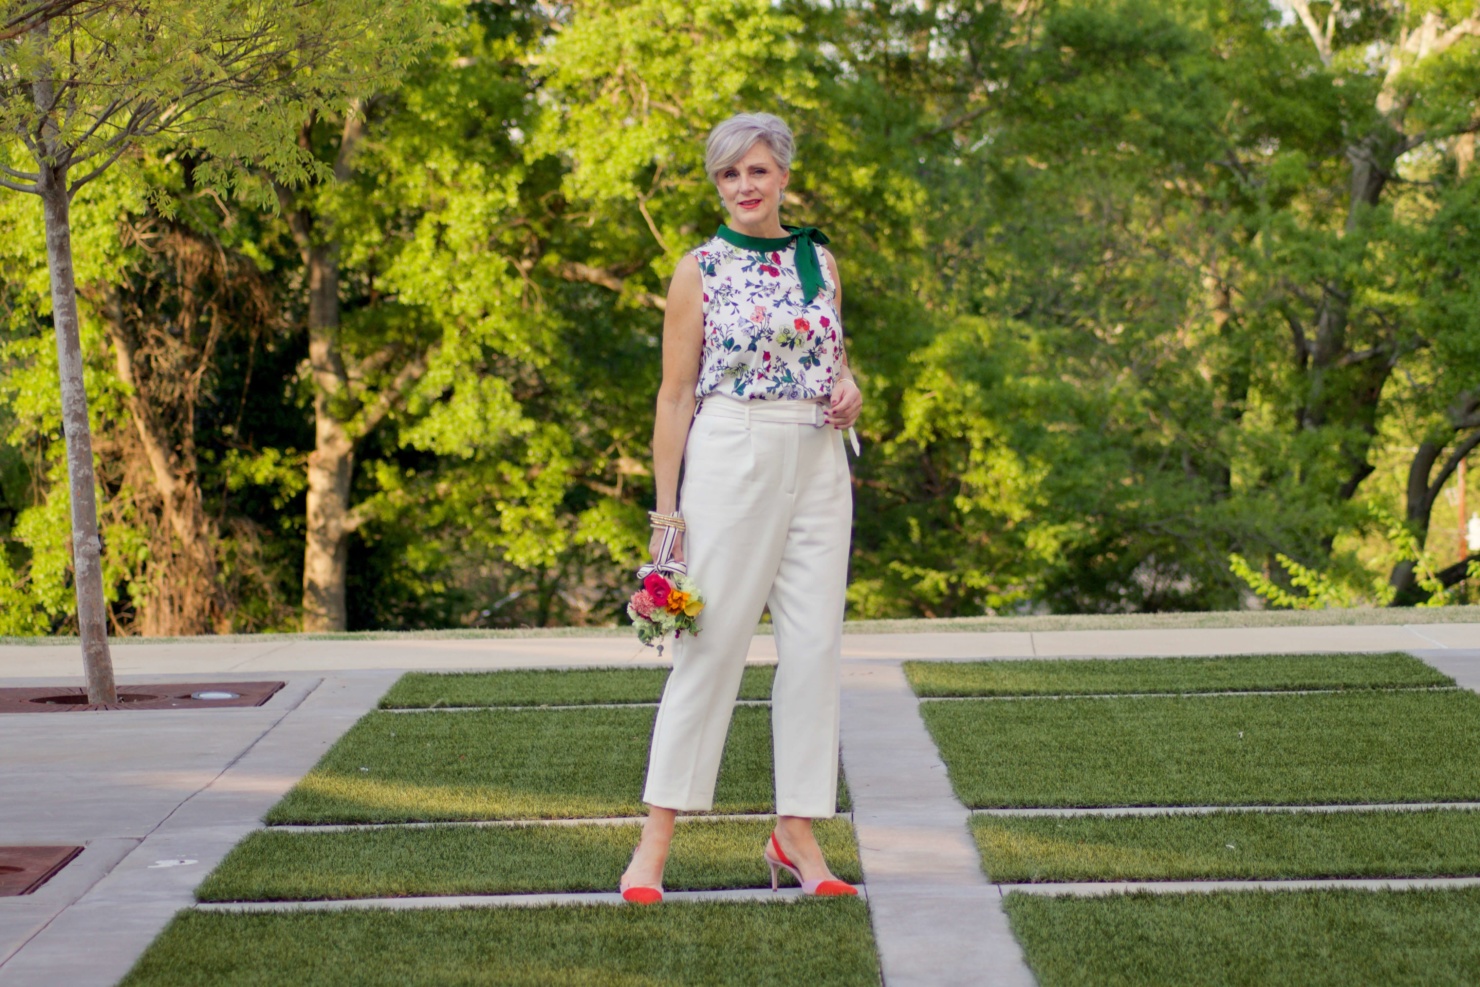 beth from Style at a Certain Age wears Ann Taylor floral sleeveless tie neck blouse, pleated pants, textured blazer, and suede slingbacks